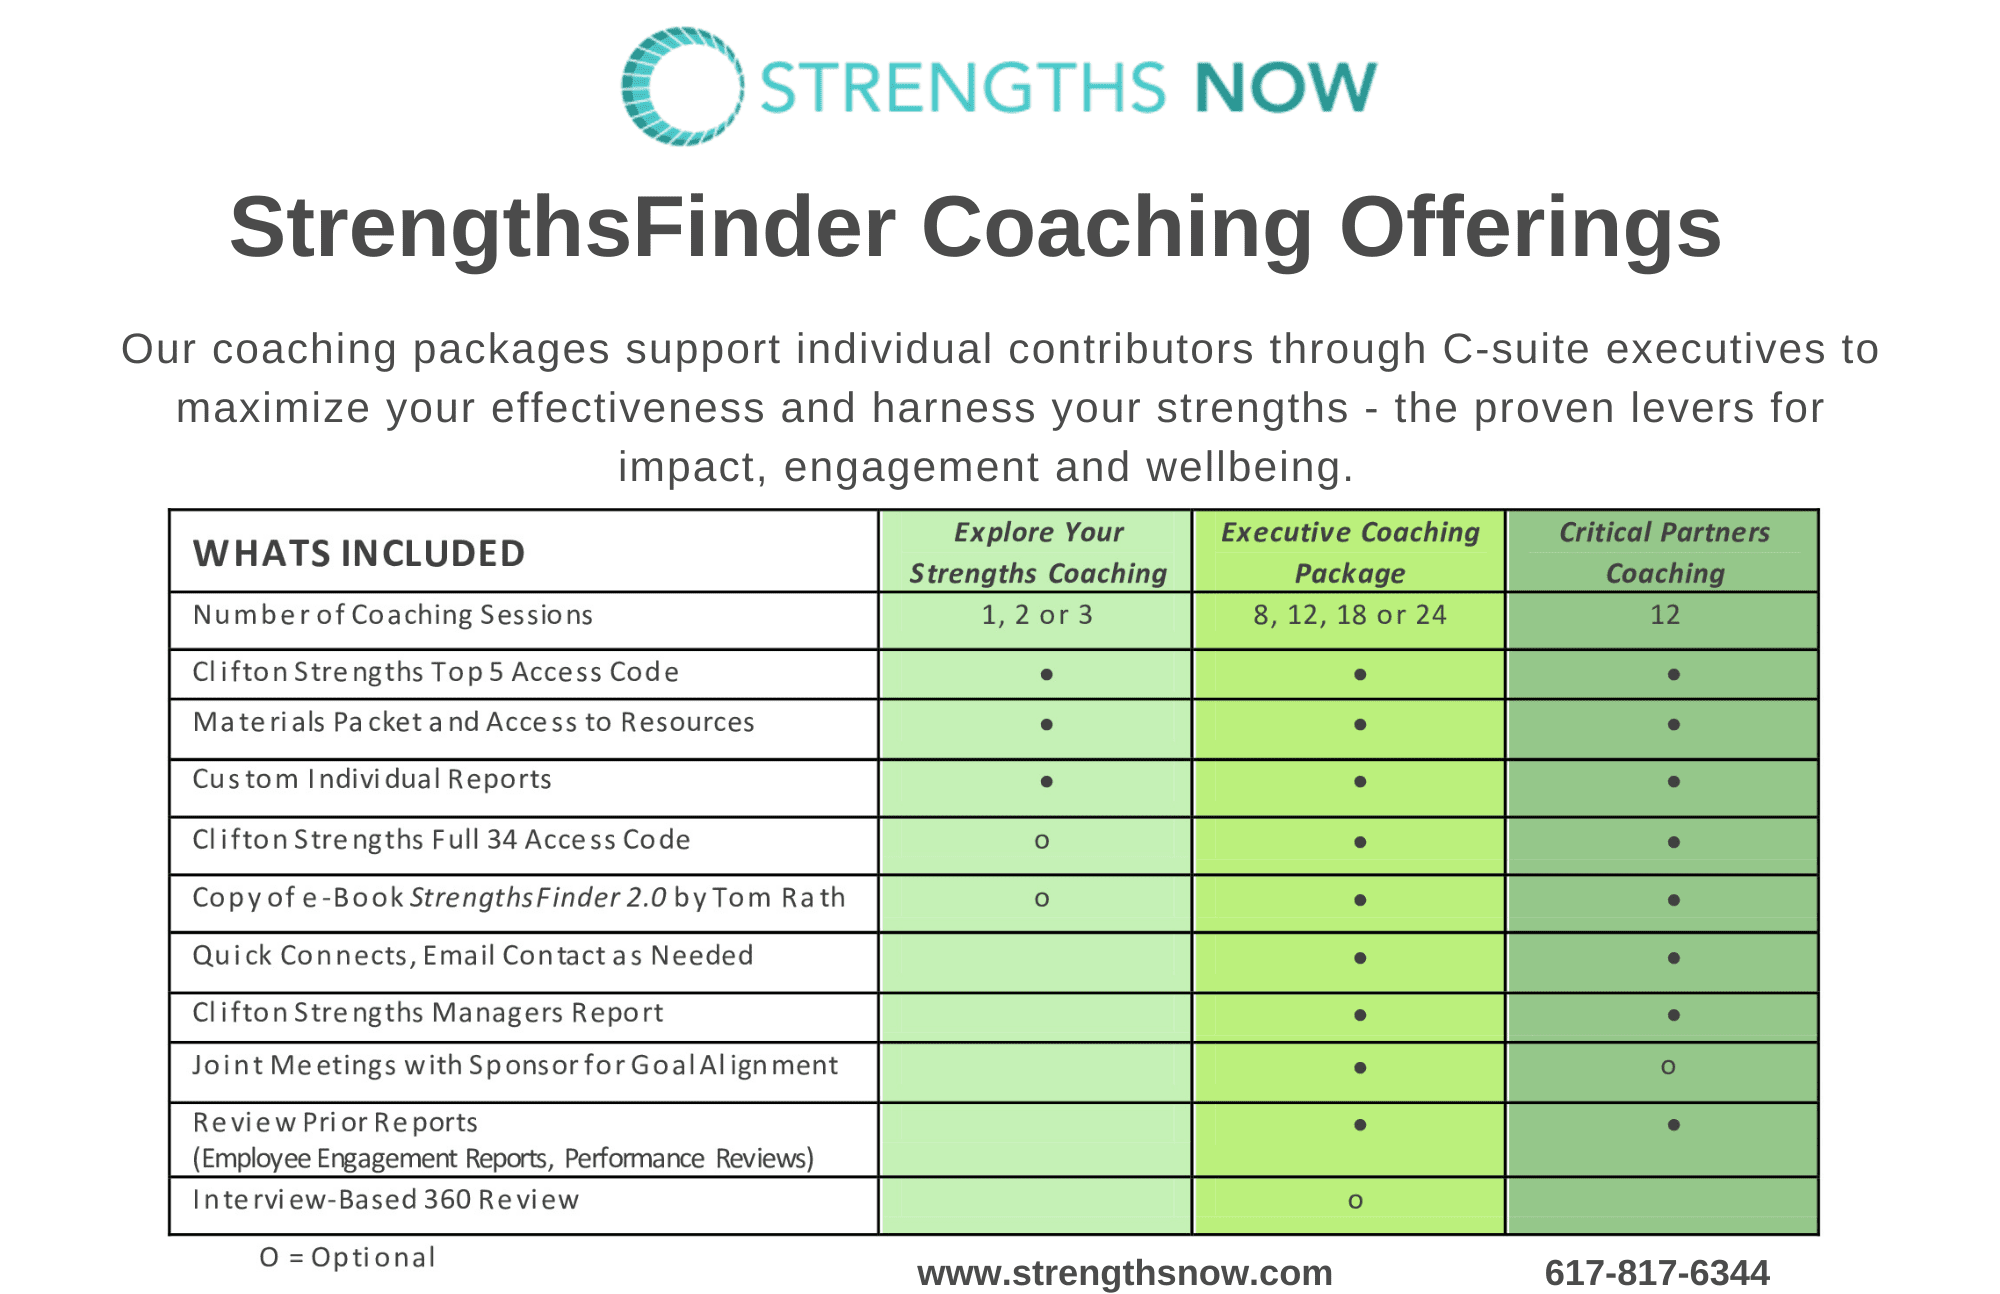 Strengths Finder Coaching Offerings